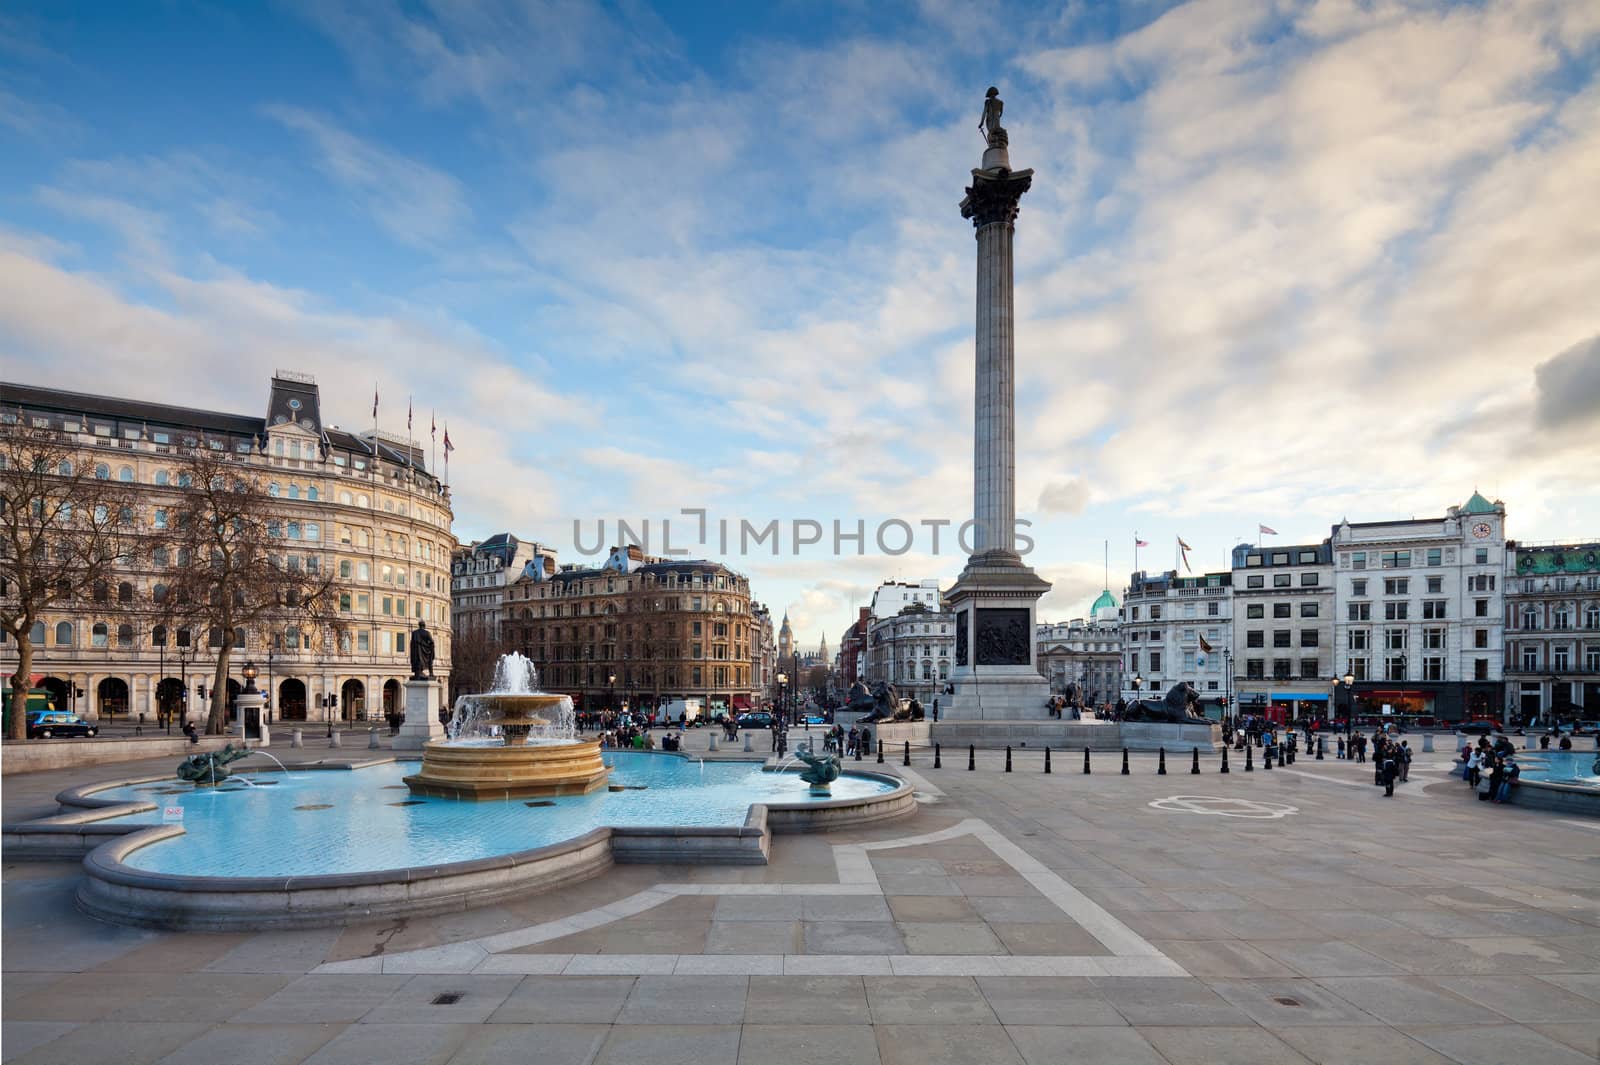 Trafalgar Square is a public space and tourist attraction in central London. Landscape shot with tilt-shift lens maintaining verticals